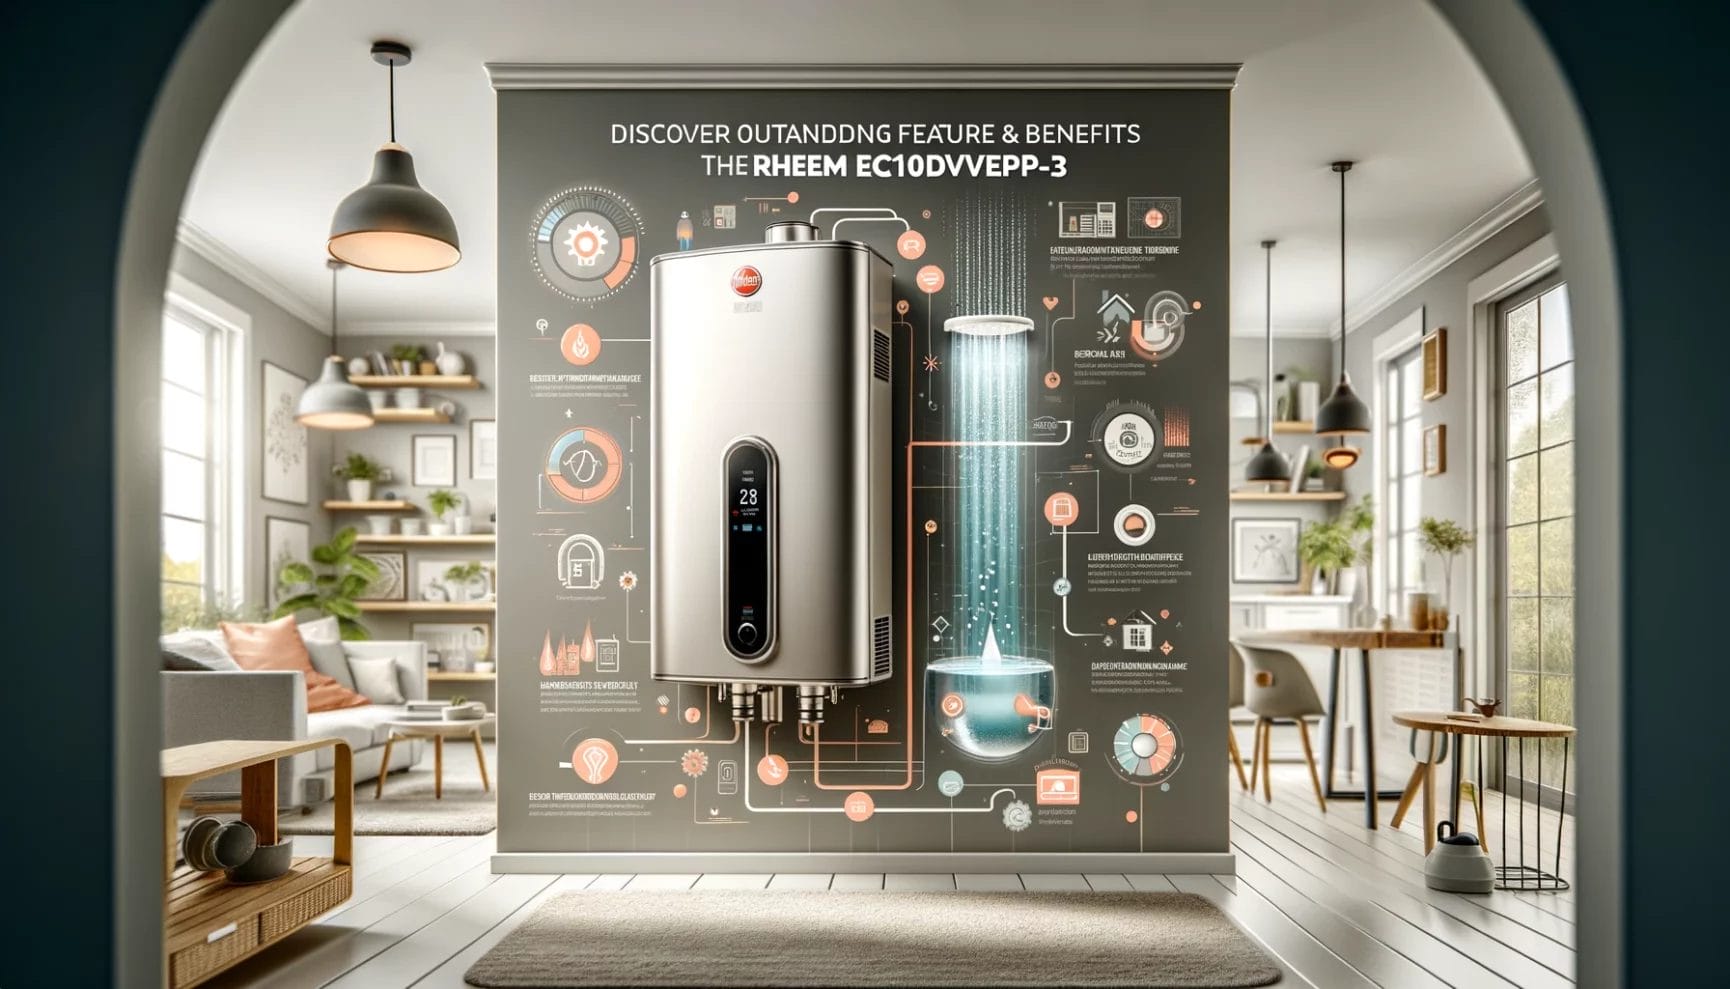 A promotional display in a home setting featuring the key features and benefits of the thermo eco110dwp3-p domestic appliance.